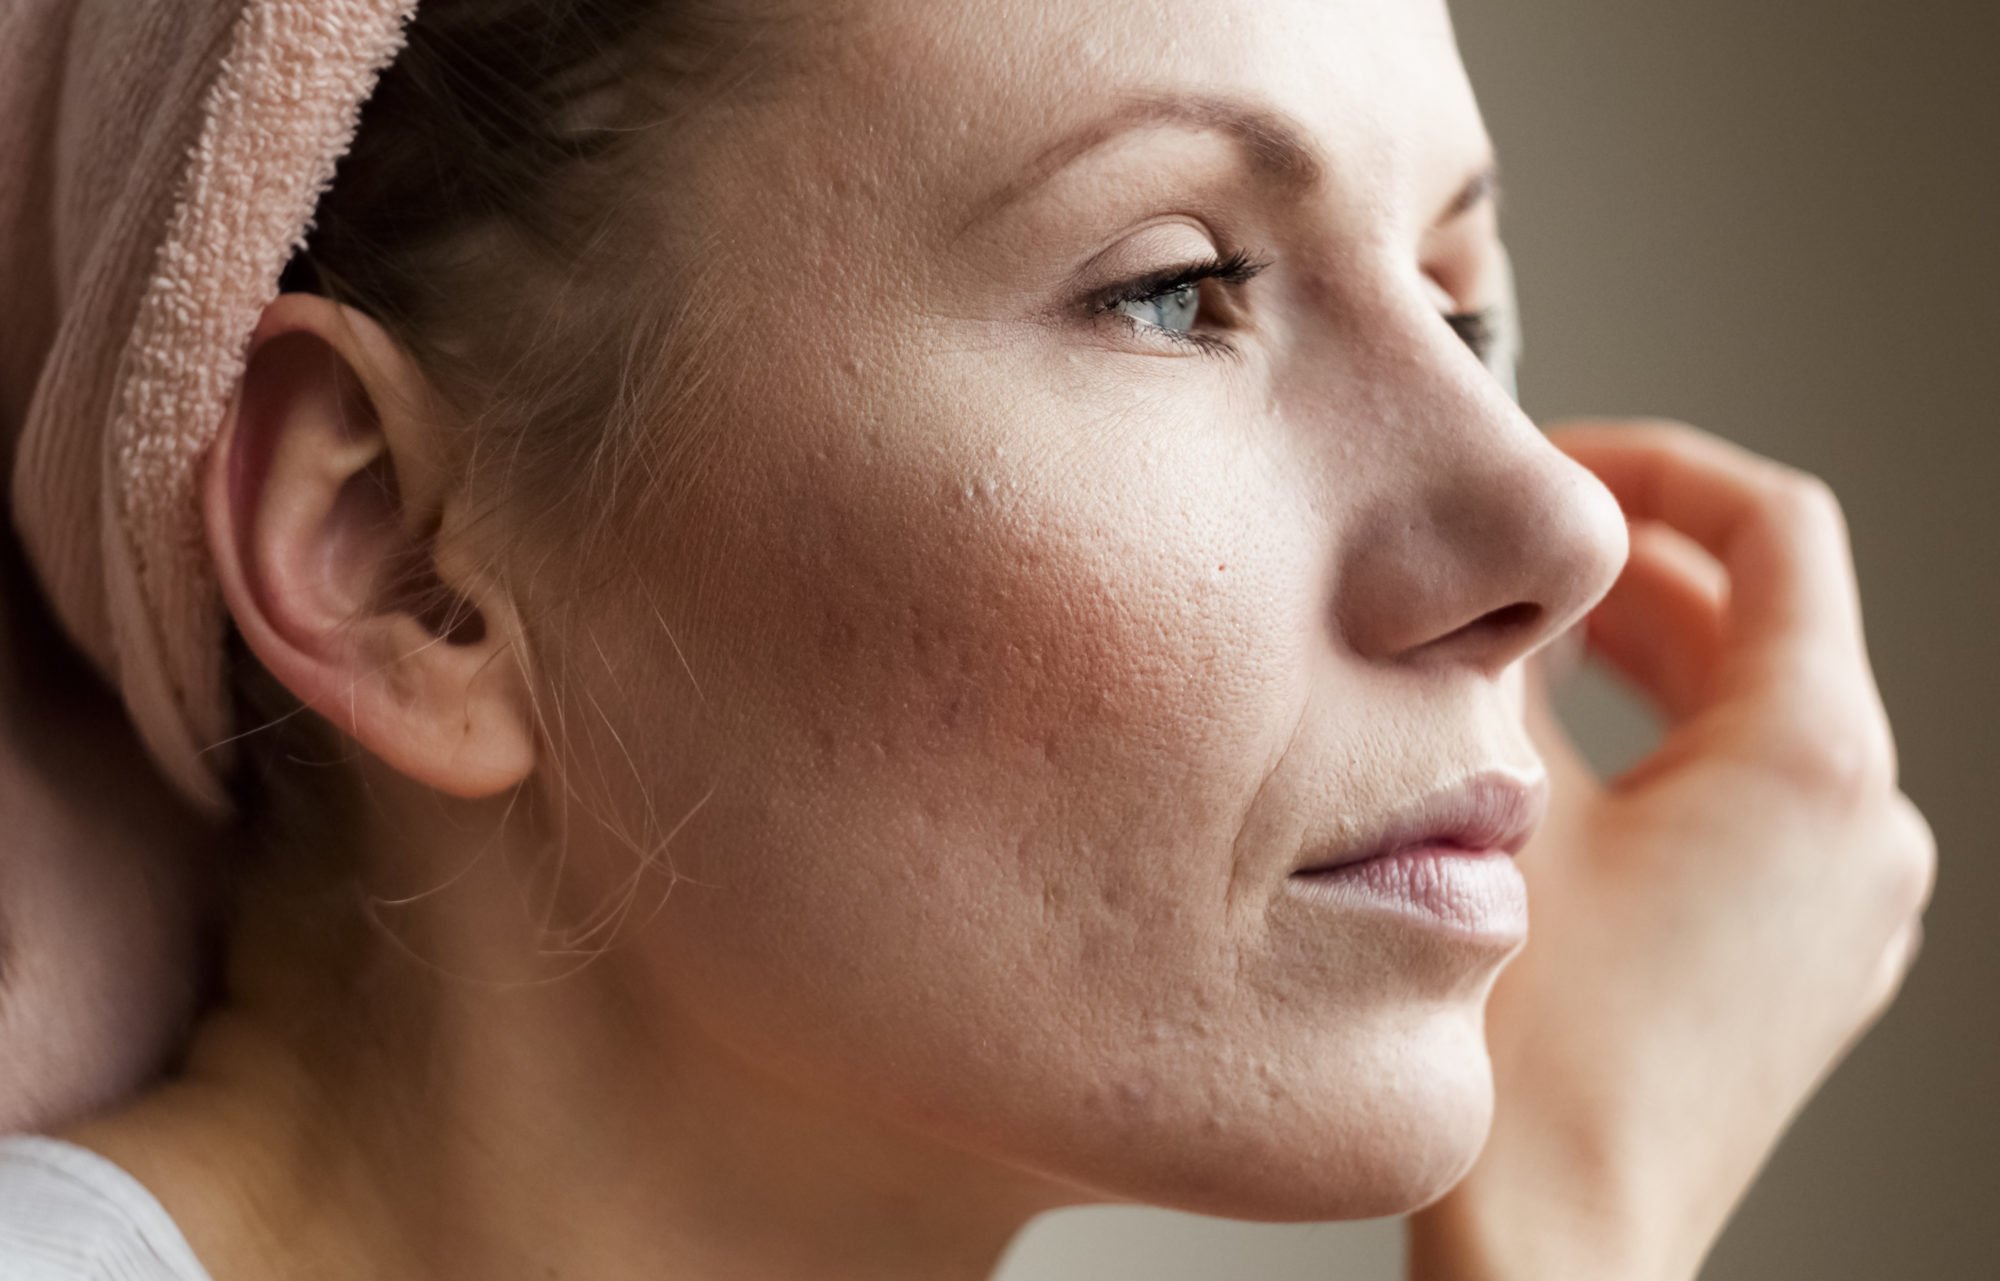 Adult Acne: A Dermatologist’s Guide to Beating Breakouts